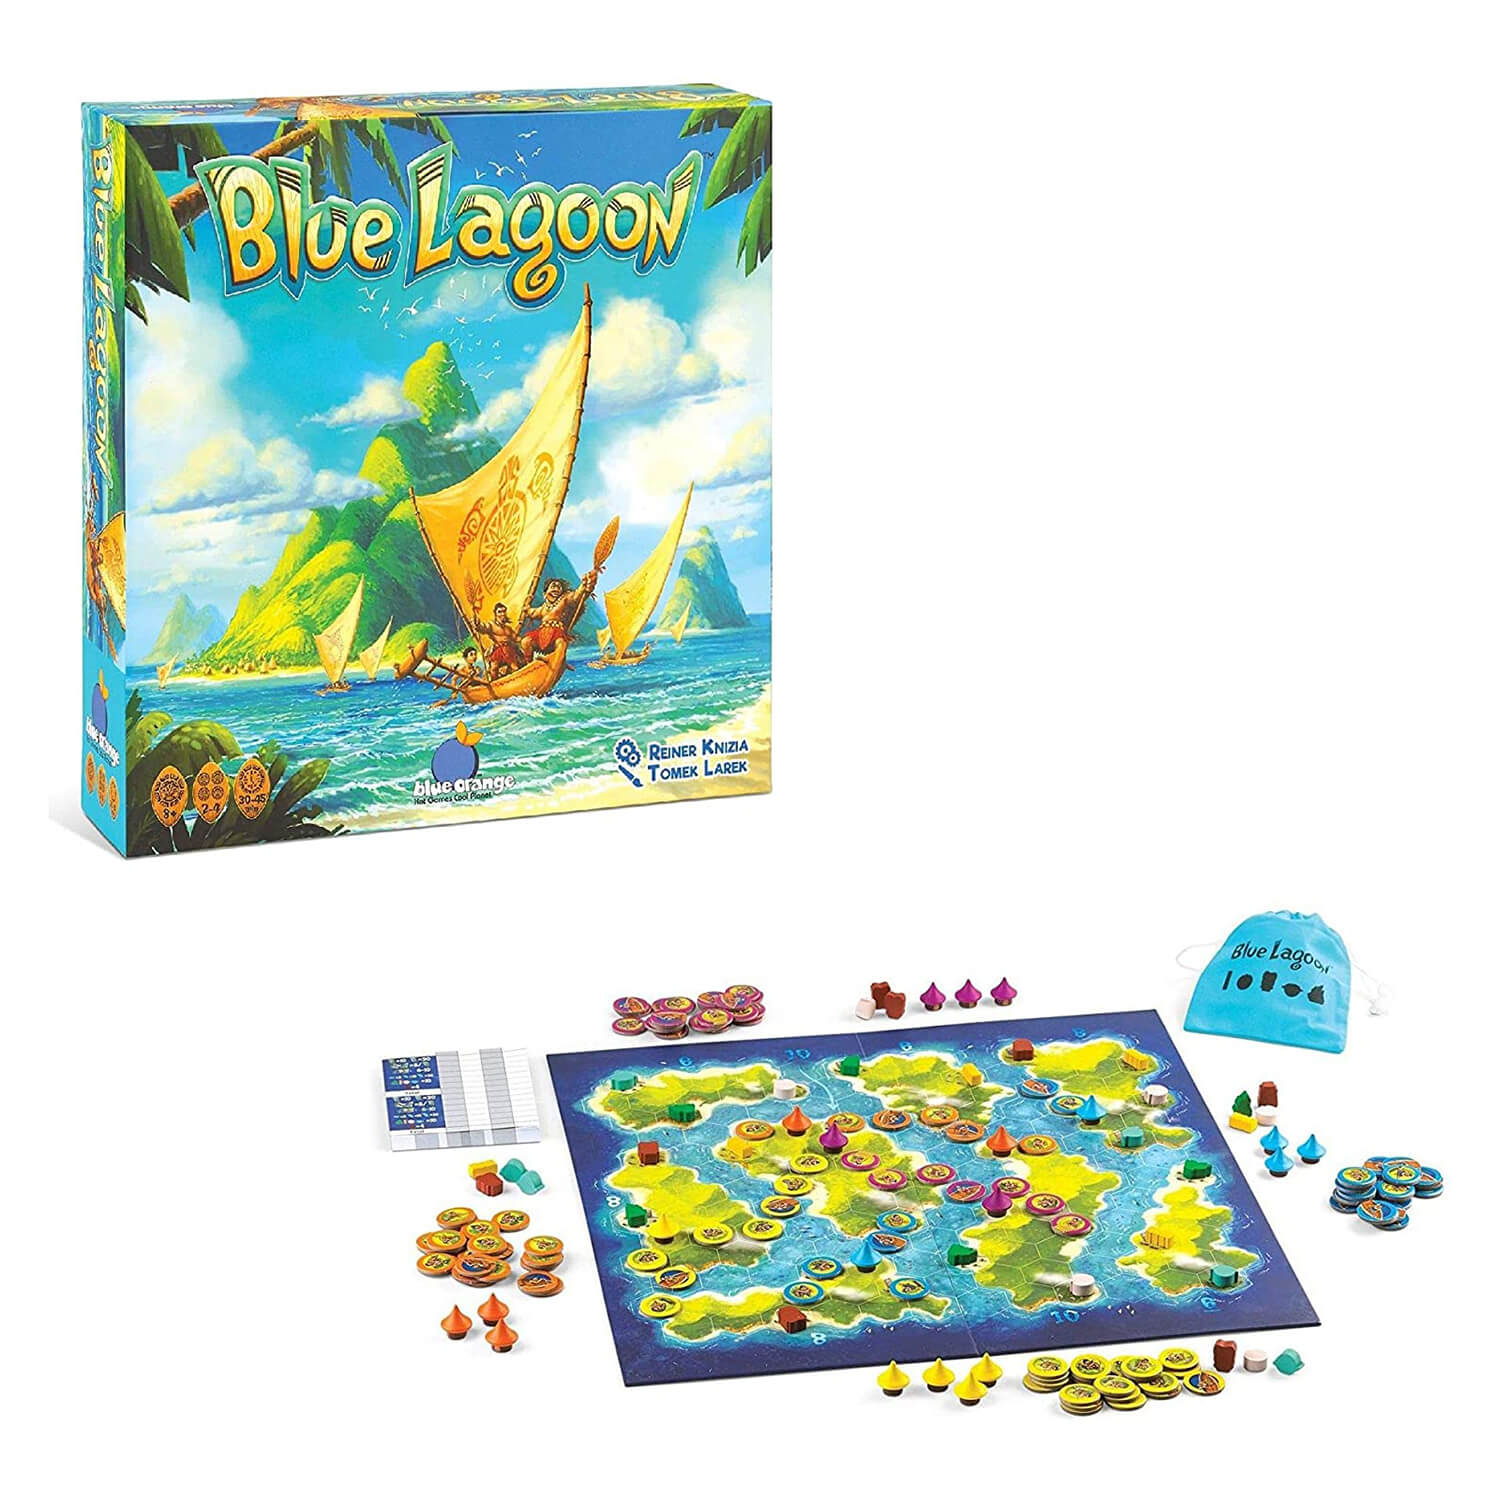 Game box and board layout for the Blue Orange Blue Lagoon Game.